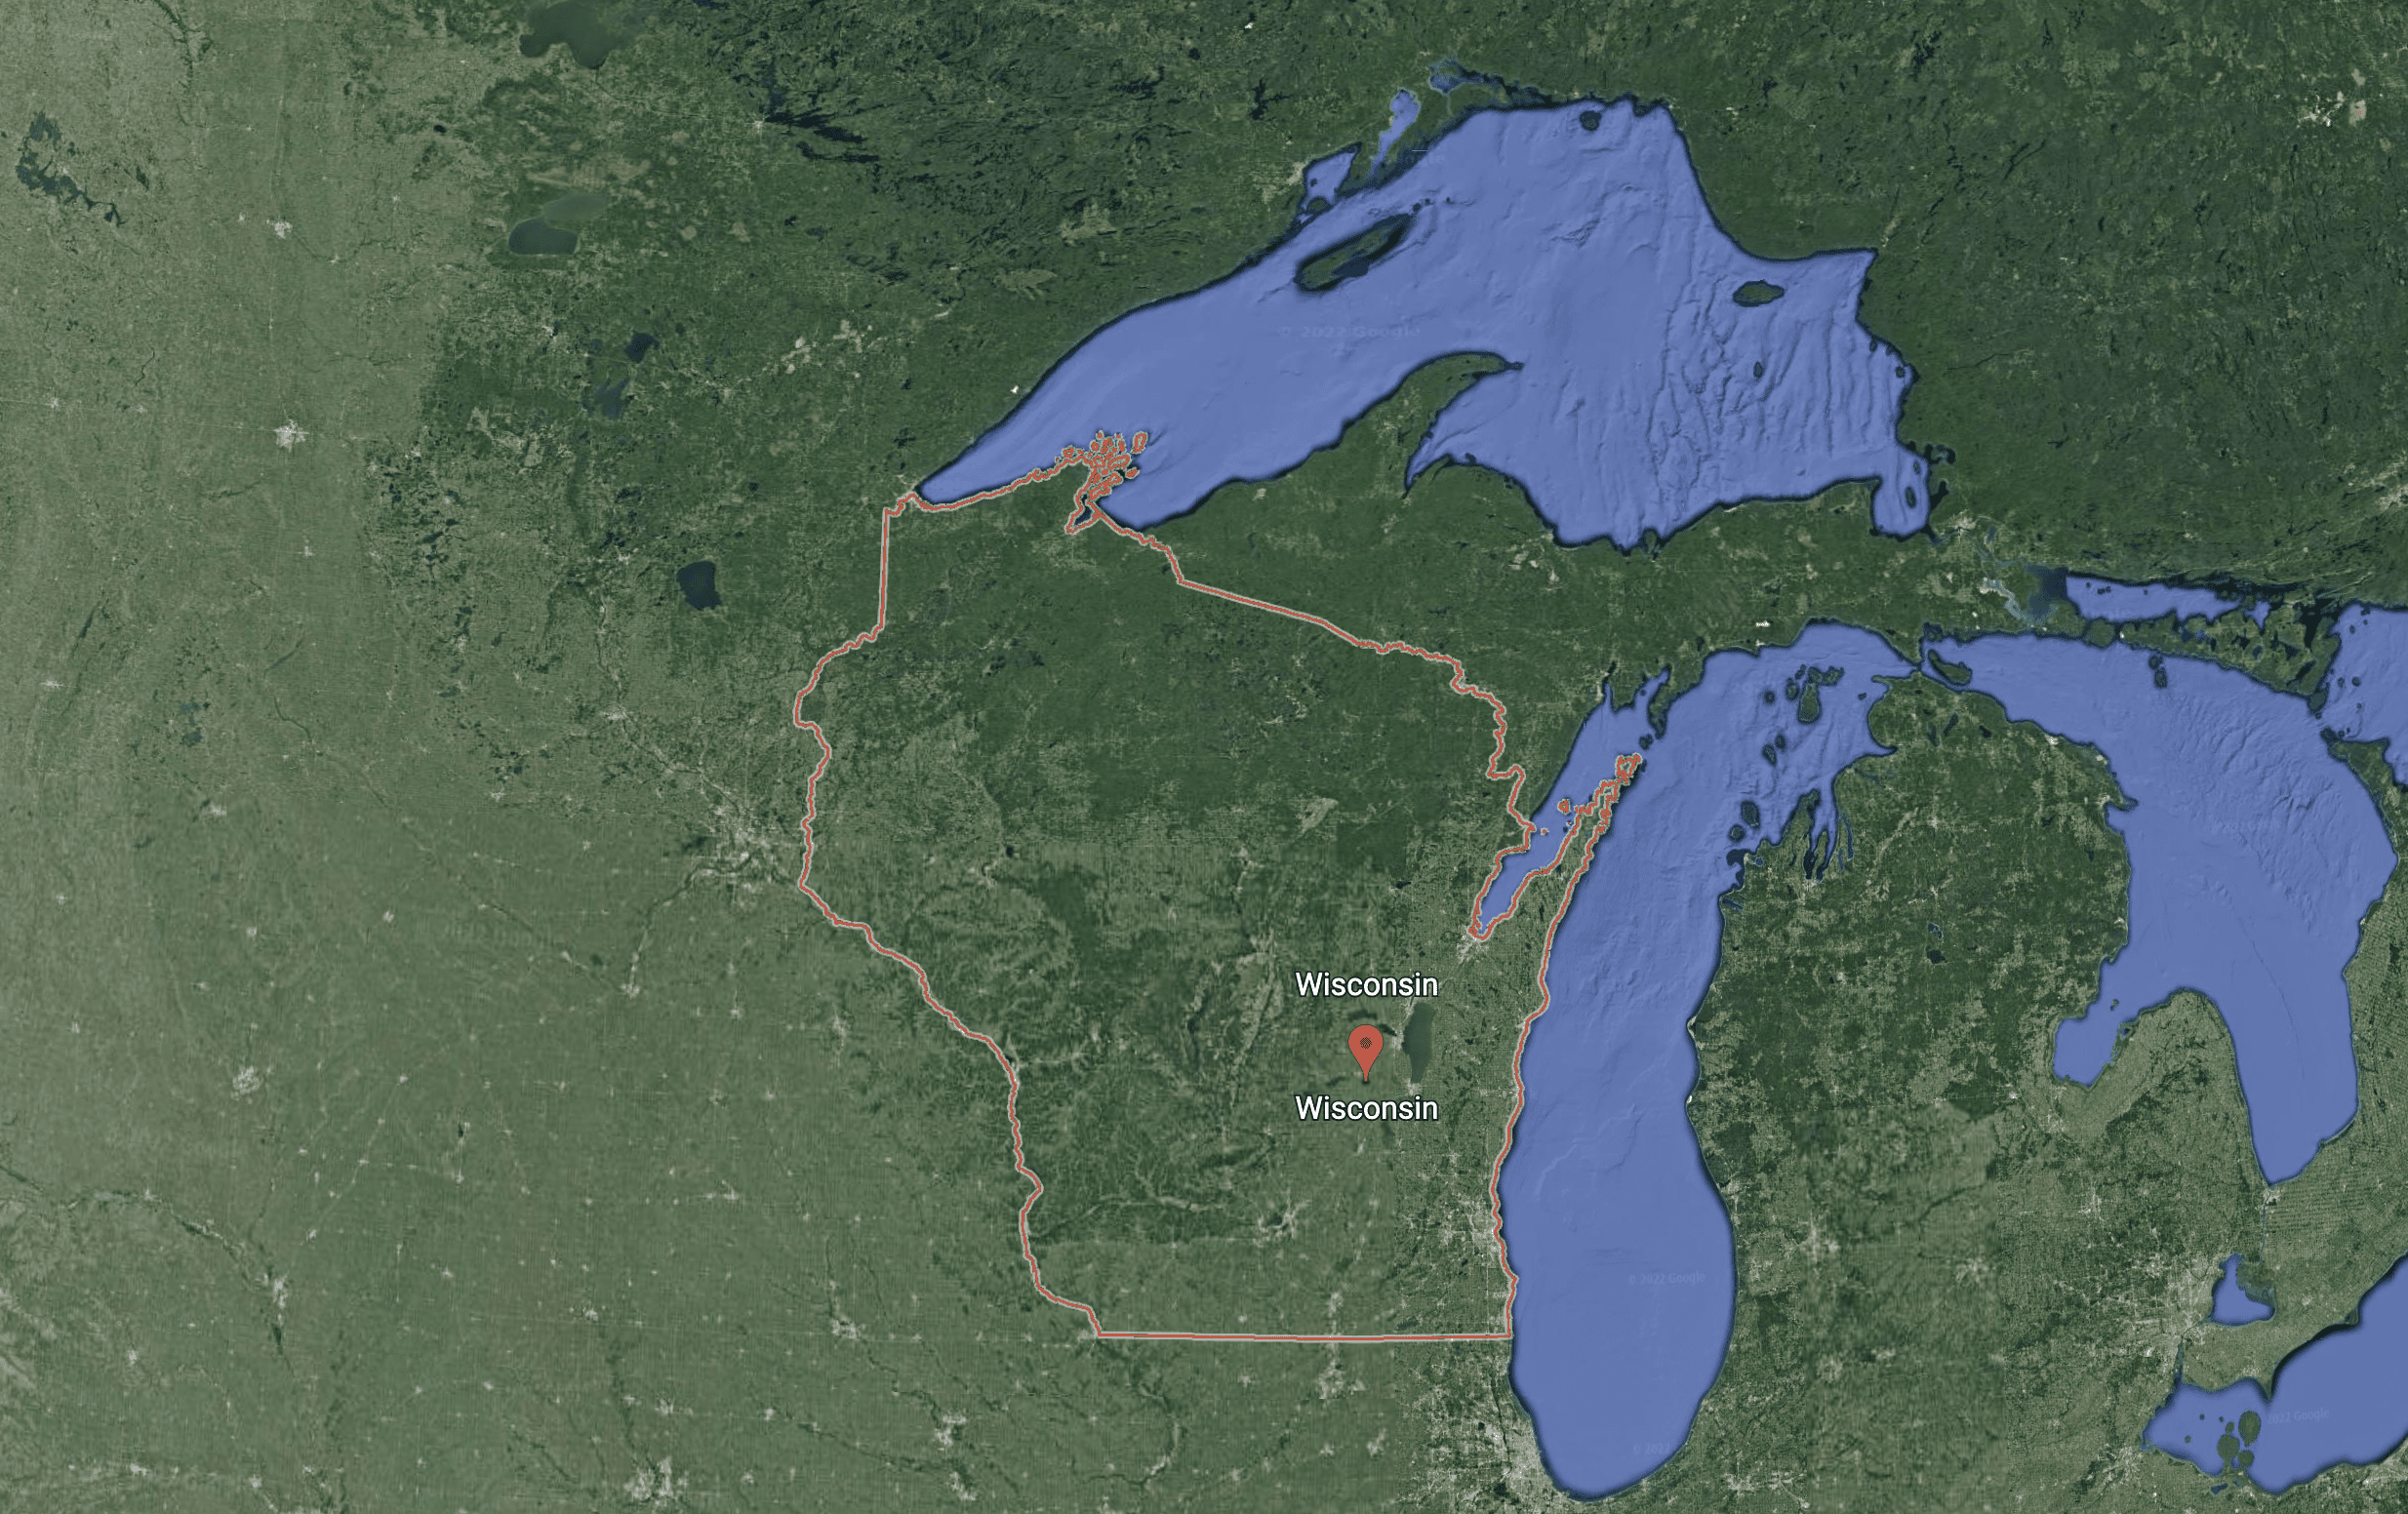 Satellite overhead image of Wisconsin from Google Earth 2022